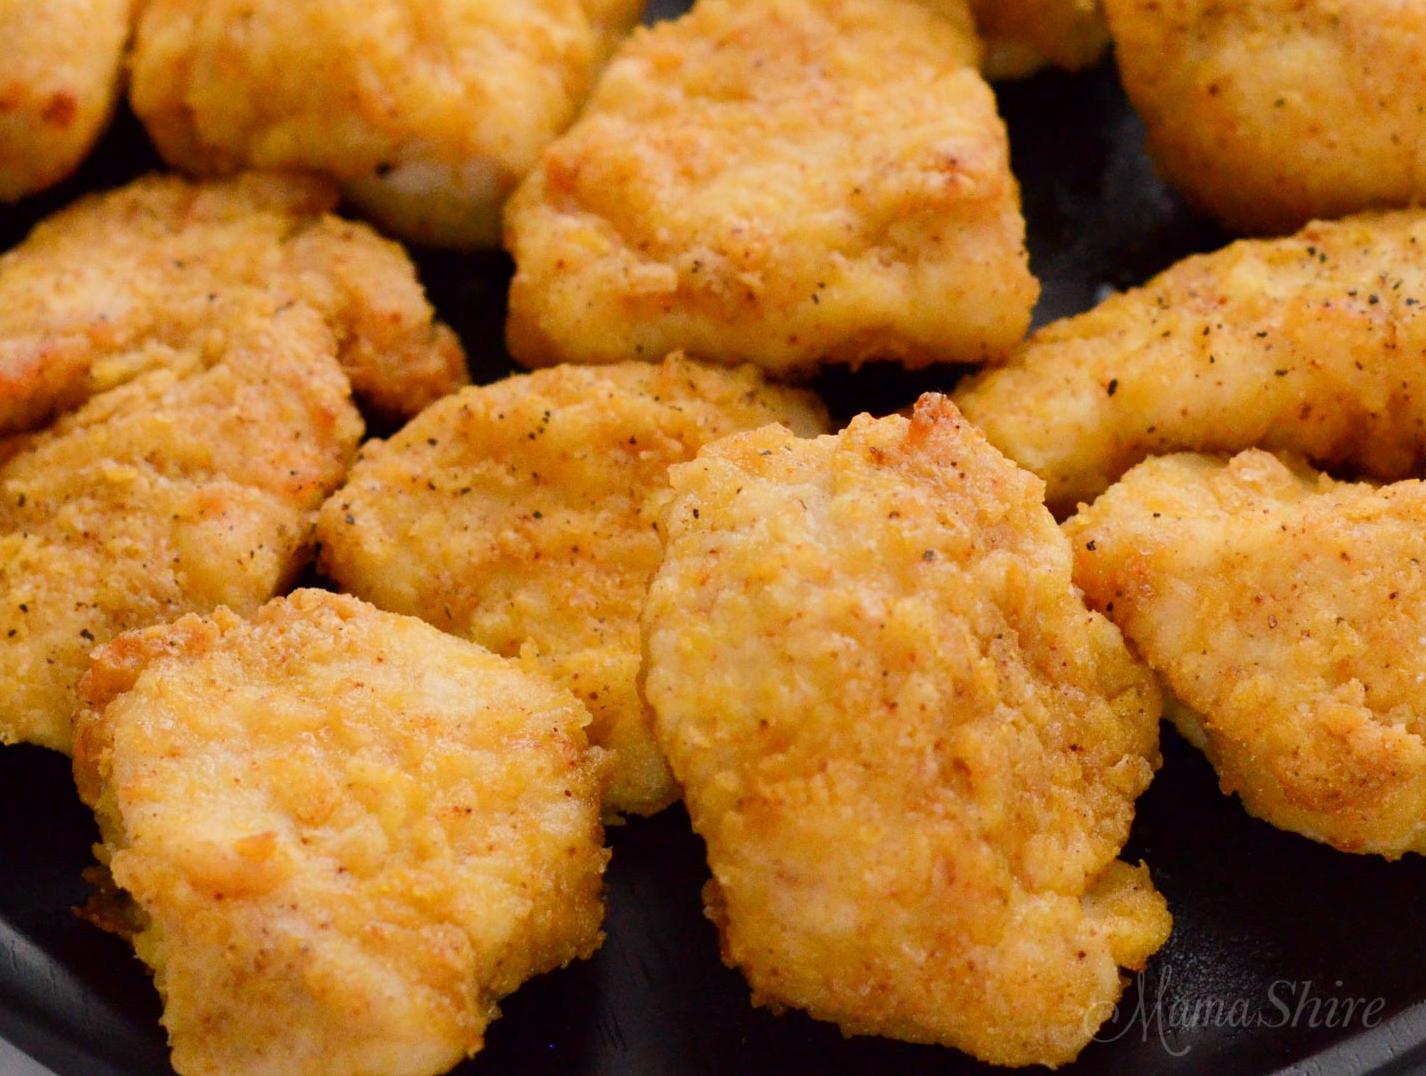  You won't believe how easy and straightforward it is to make these gluten-free chicken nuggets.